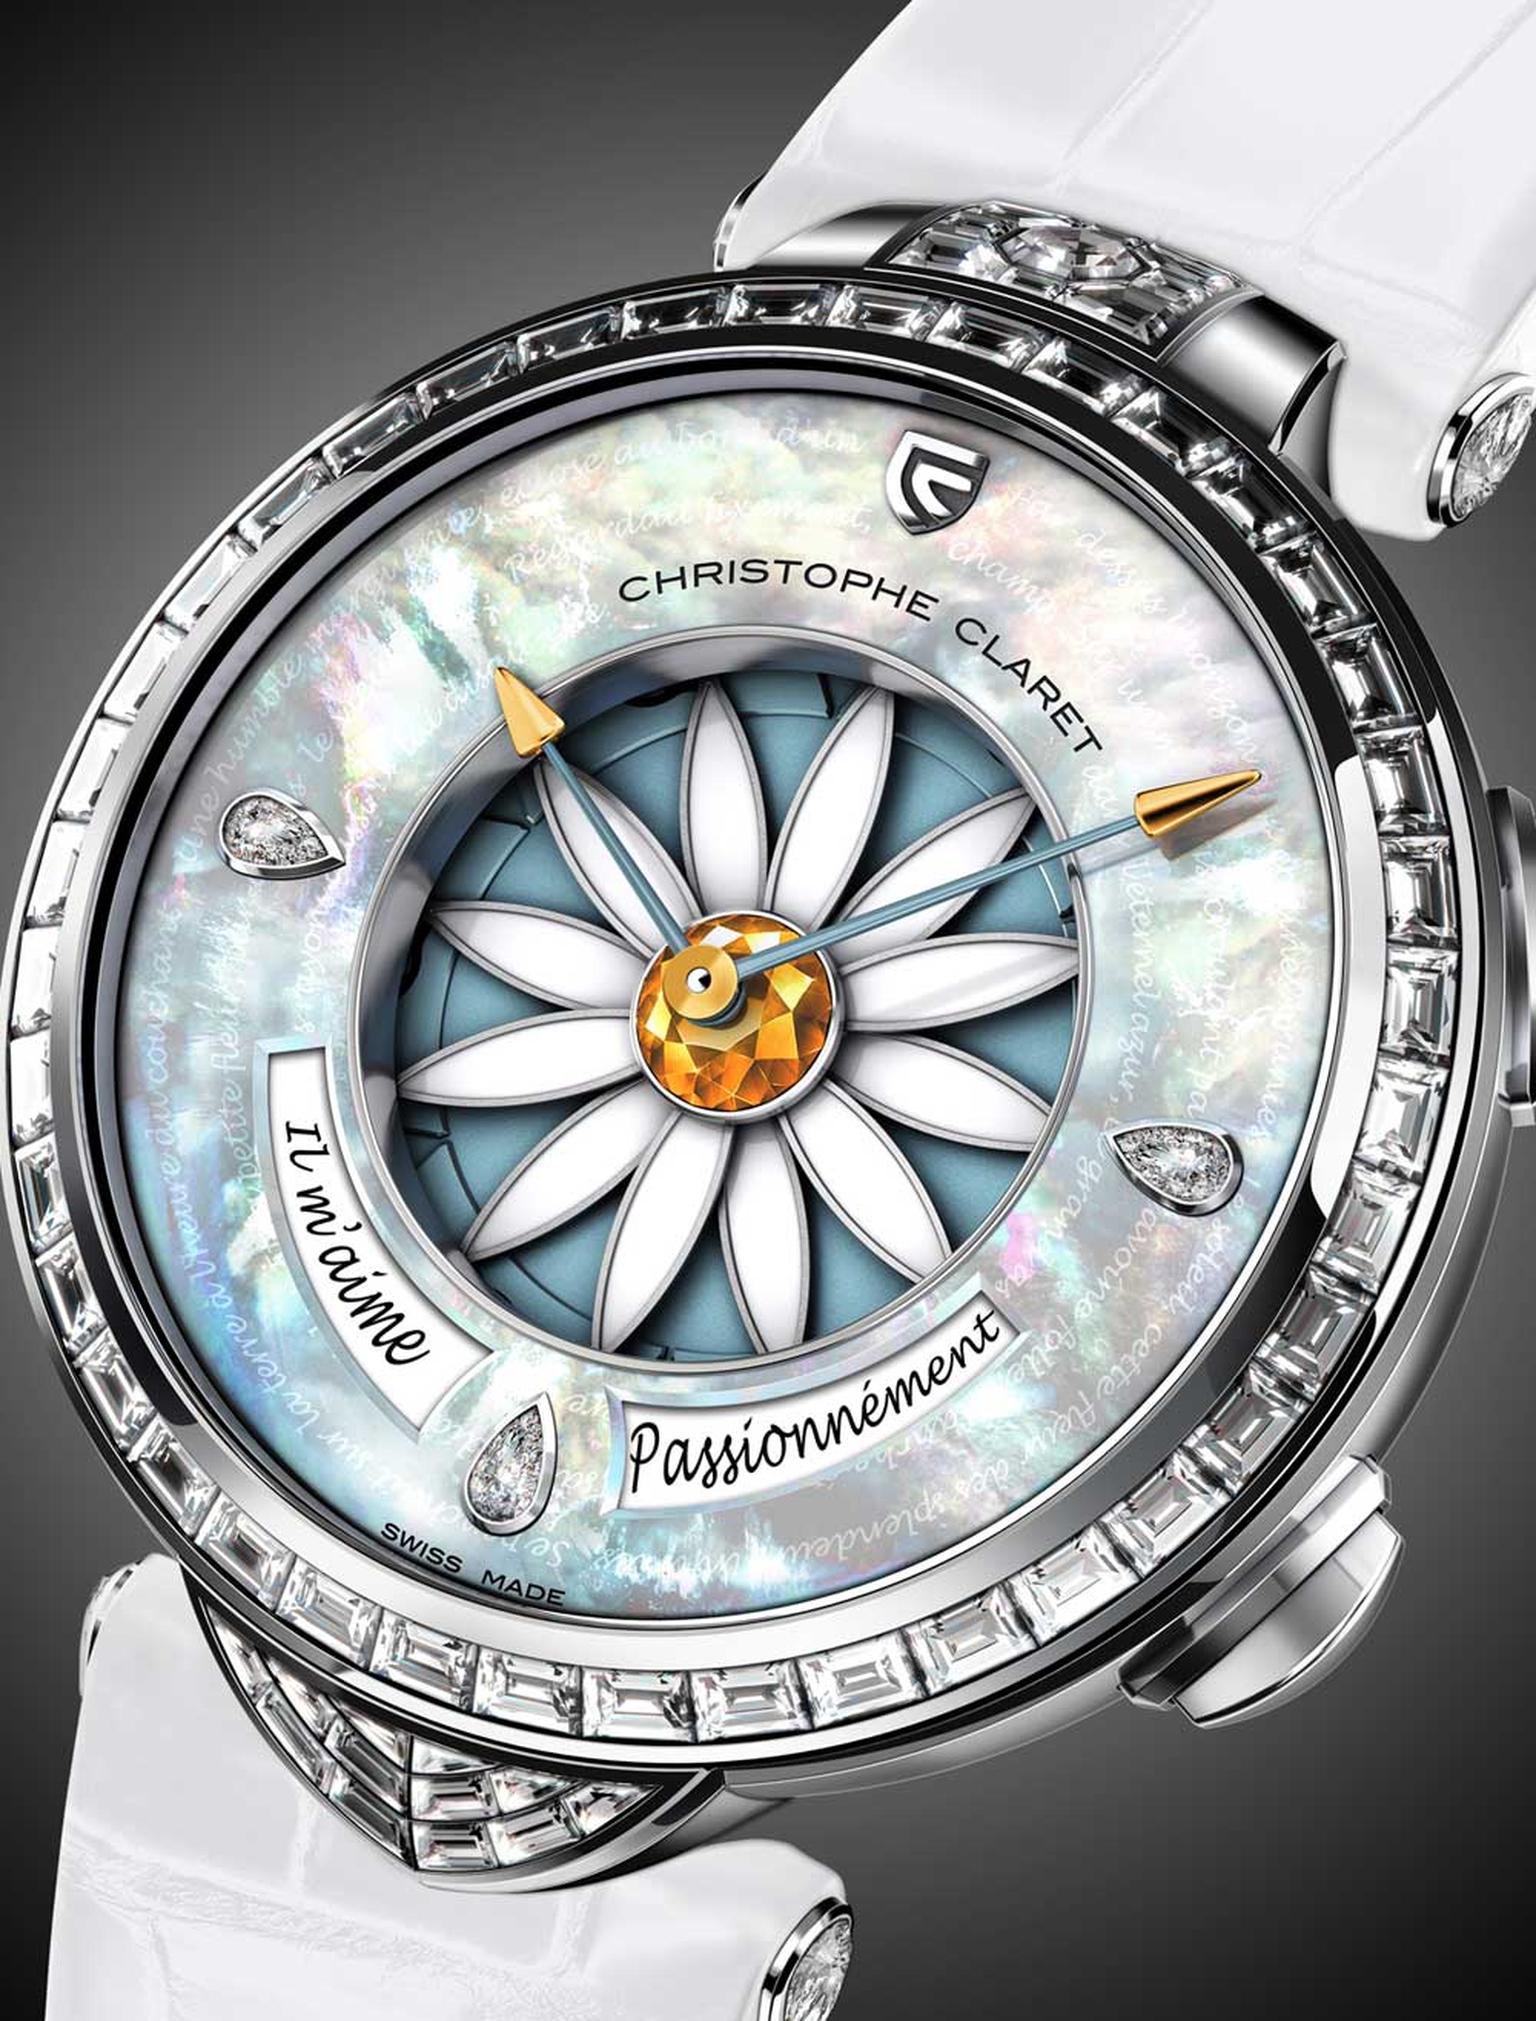 Christophe Claret's Margot watch features a natural blue mother-of-pearl dial inscribed with verses by Victor Hugo encircling the 12 white lacquered petals attached to the yellow sapphire heart.